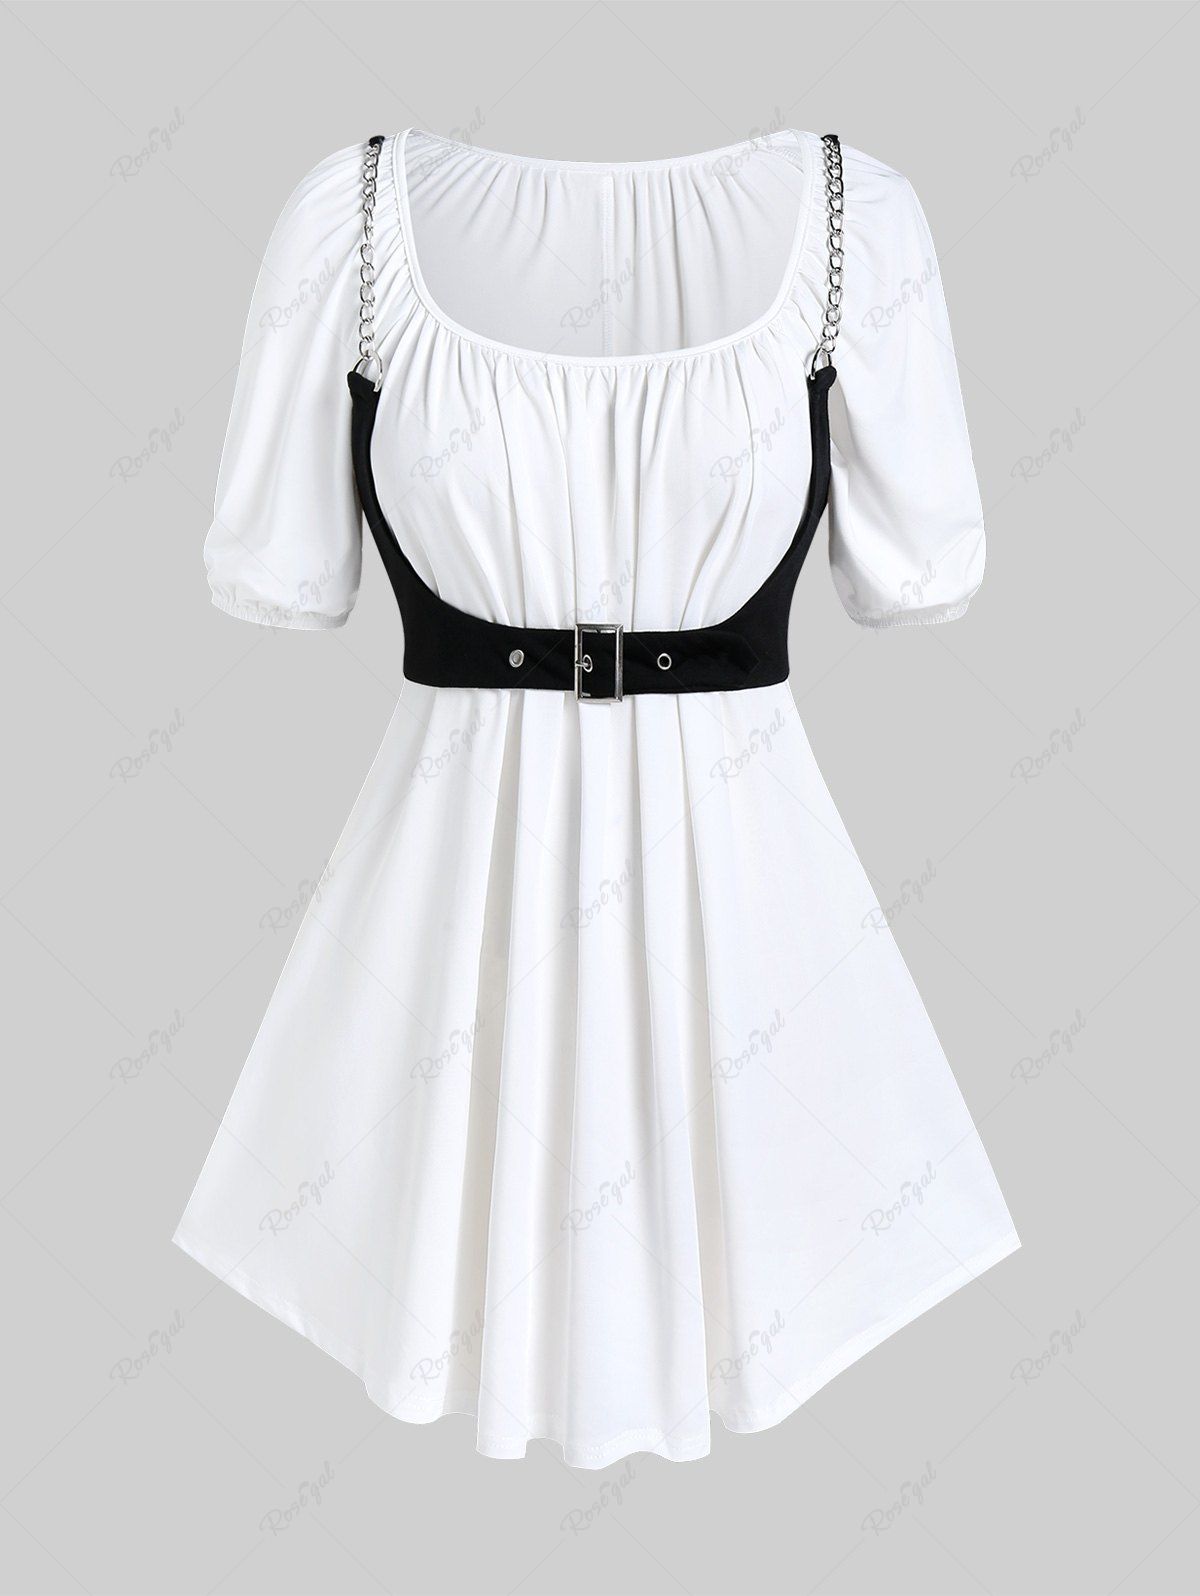 Shop Plus Size Solid Tunic Top with Chain Buckle Corset  